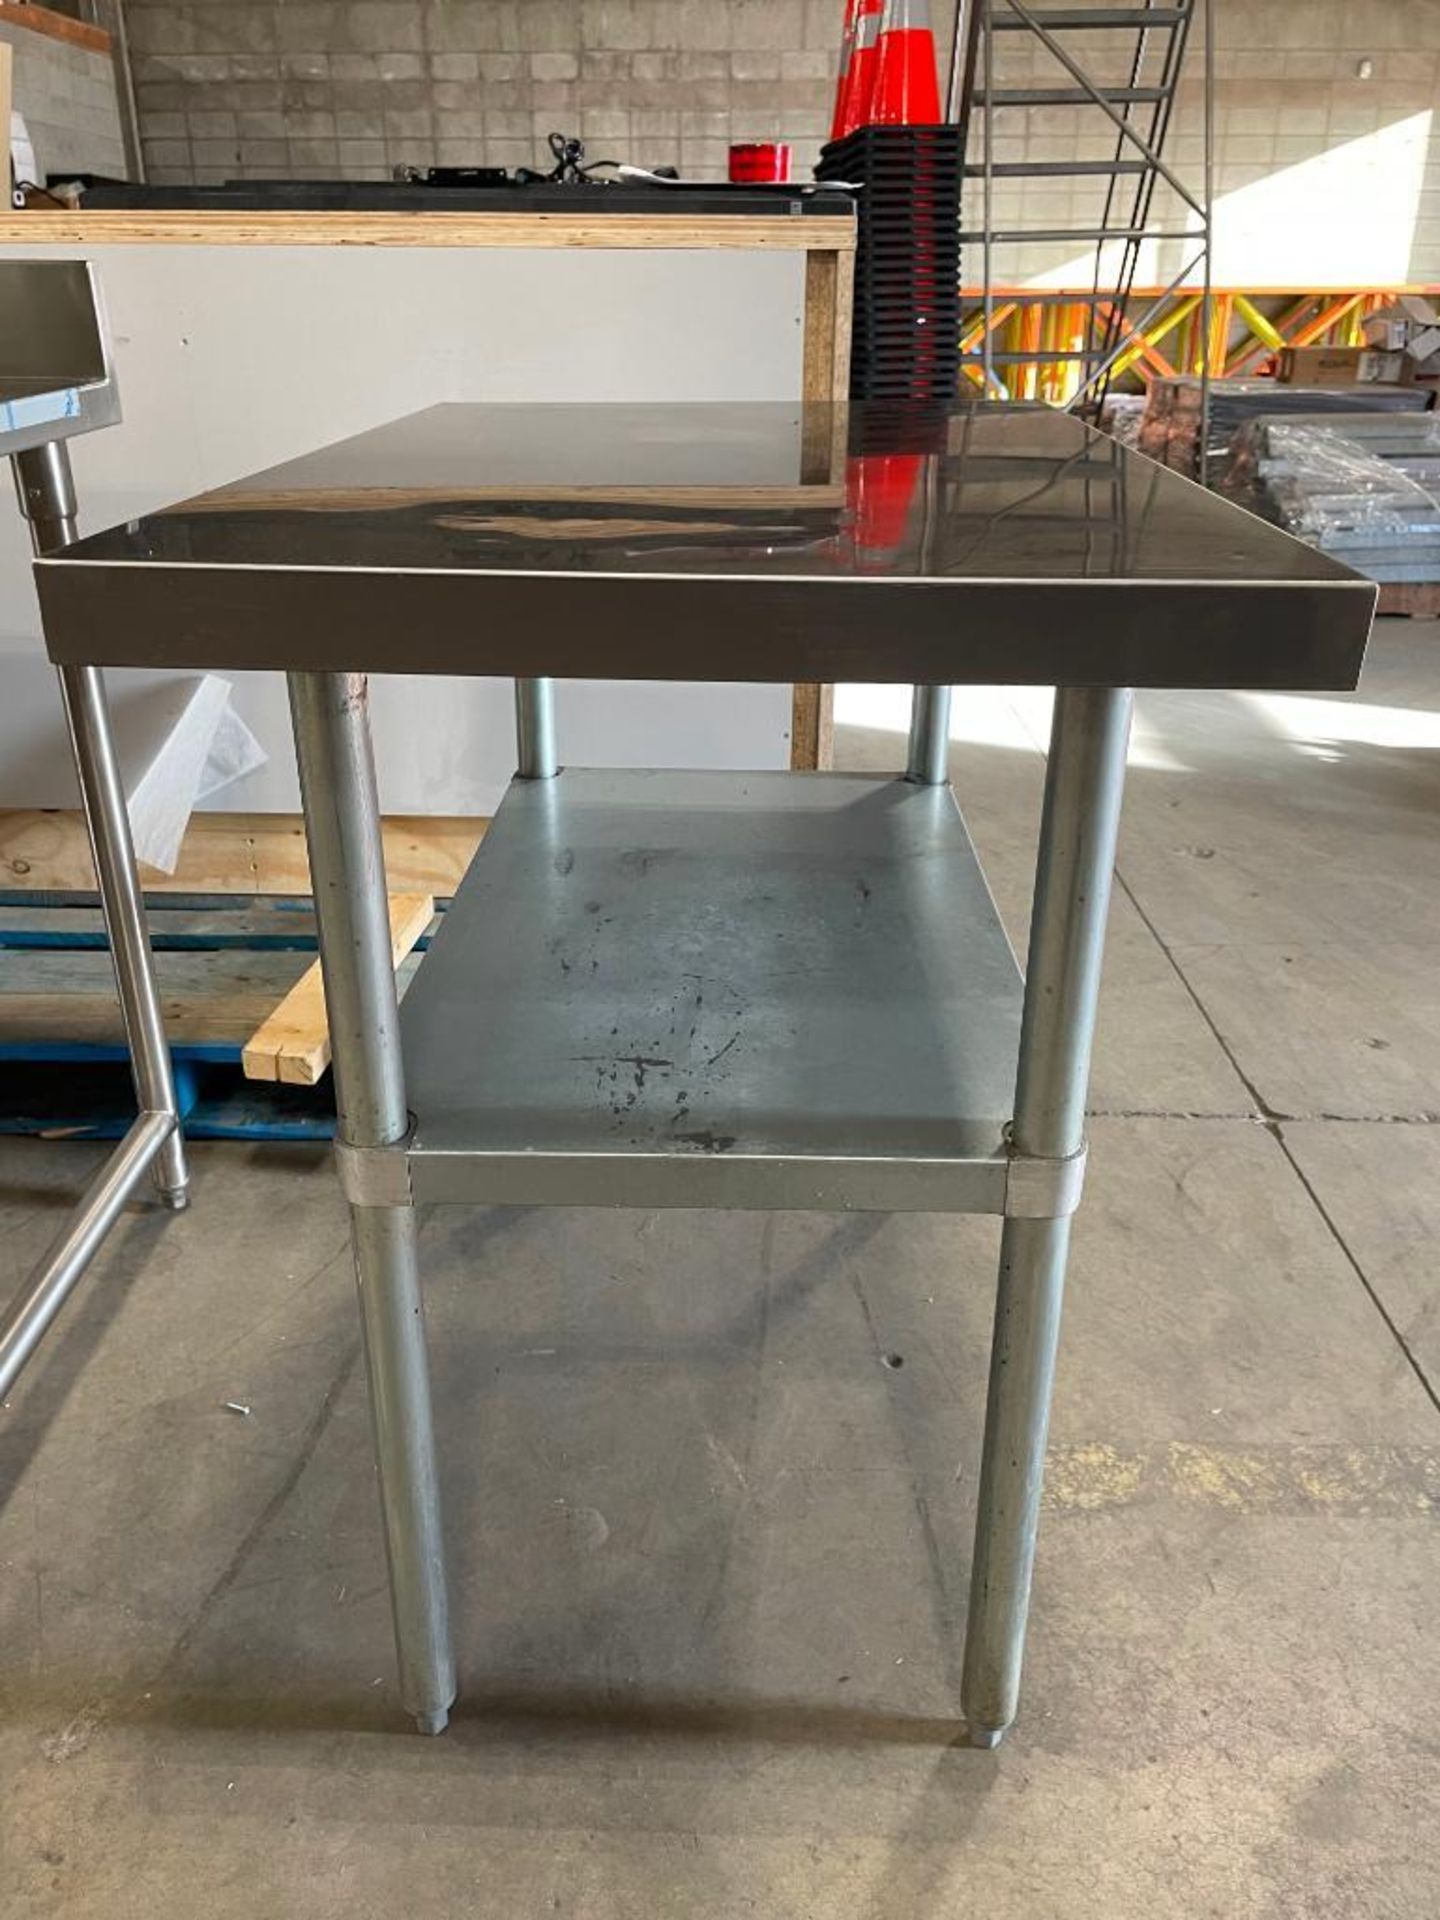 EFI 36" X 24" STAINLESS STEEL WORK TABLE - Image 4 of 6